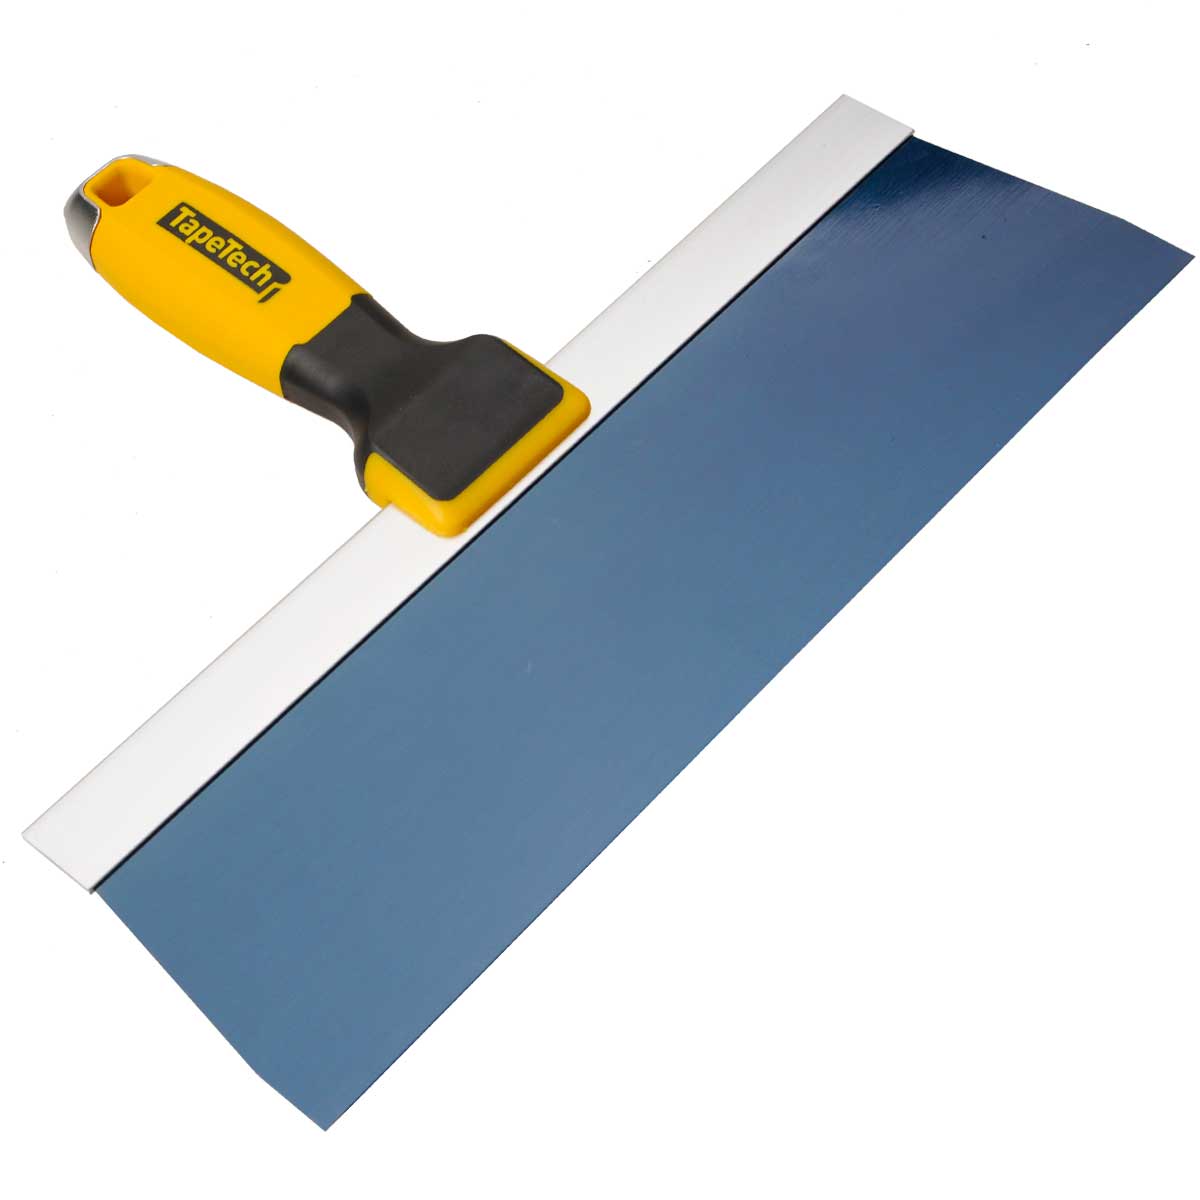 TapeTech 12" BS Taping Knife